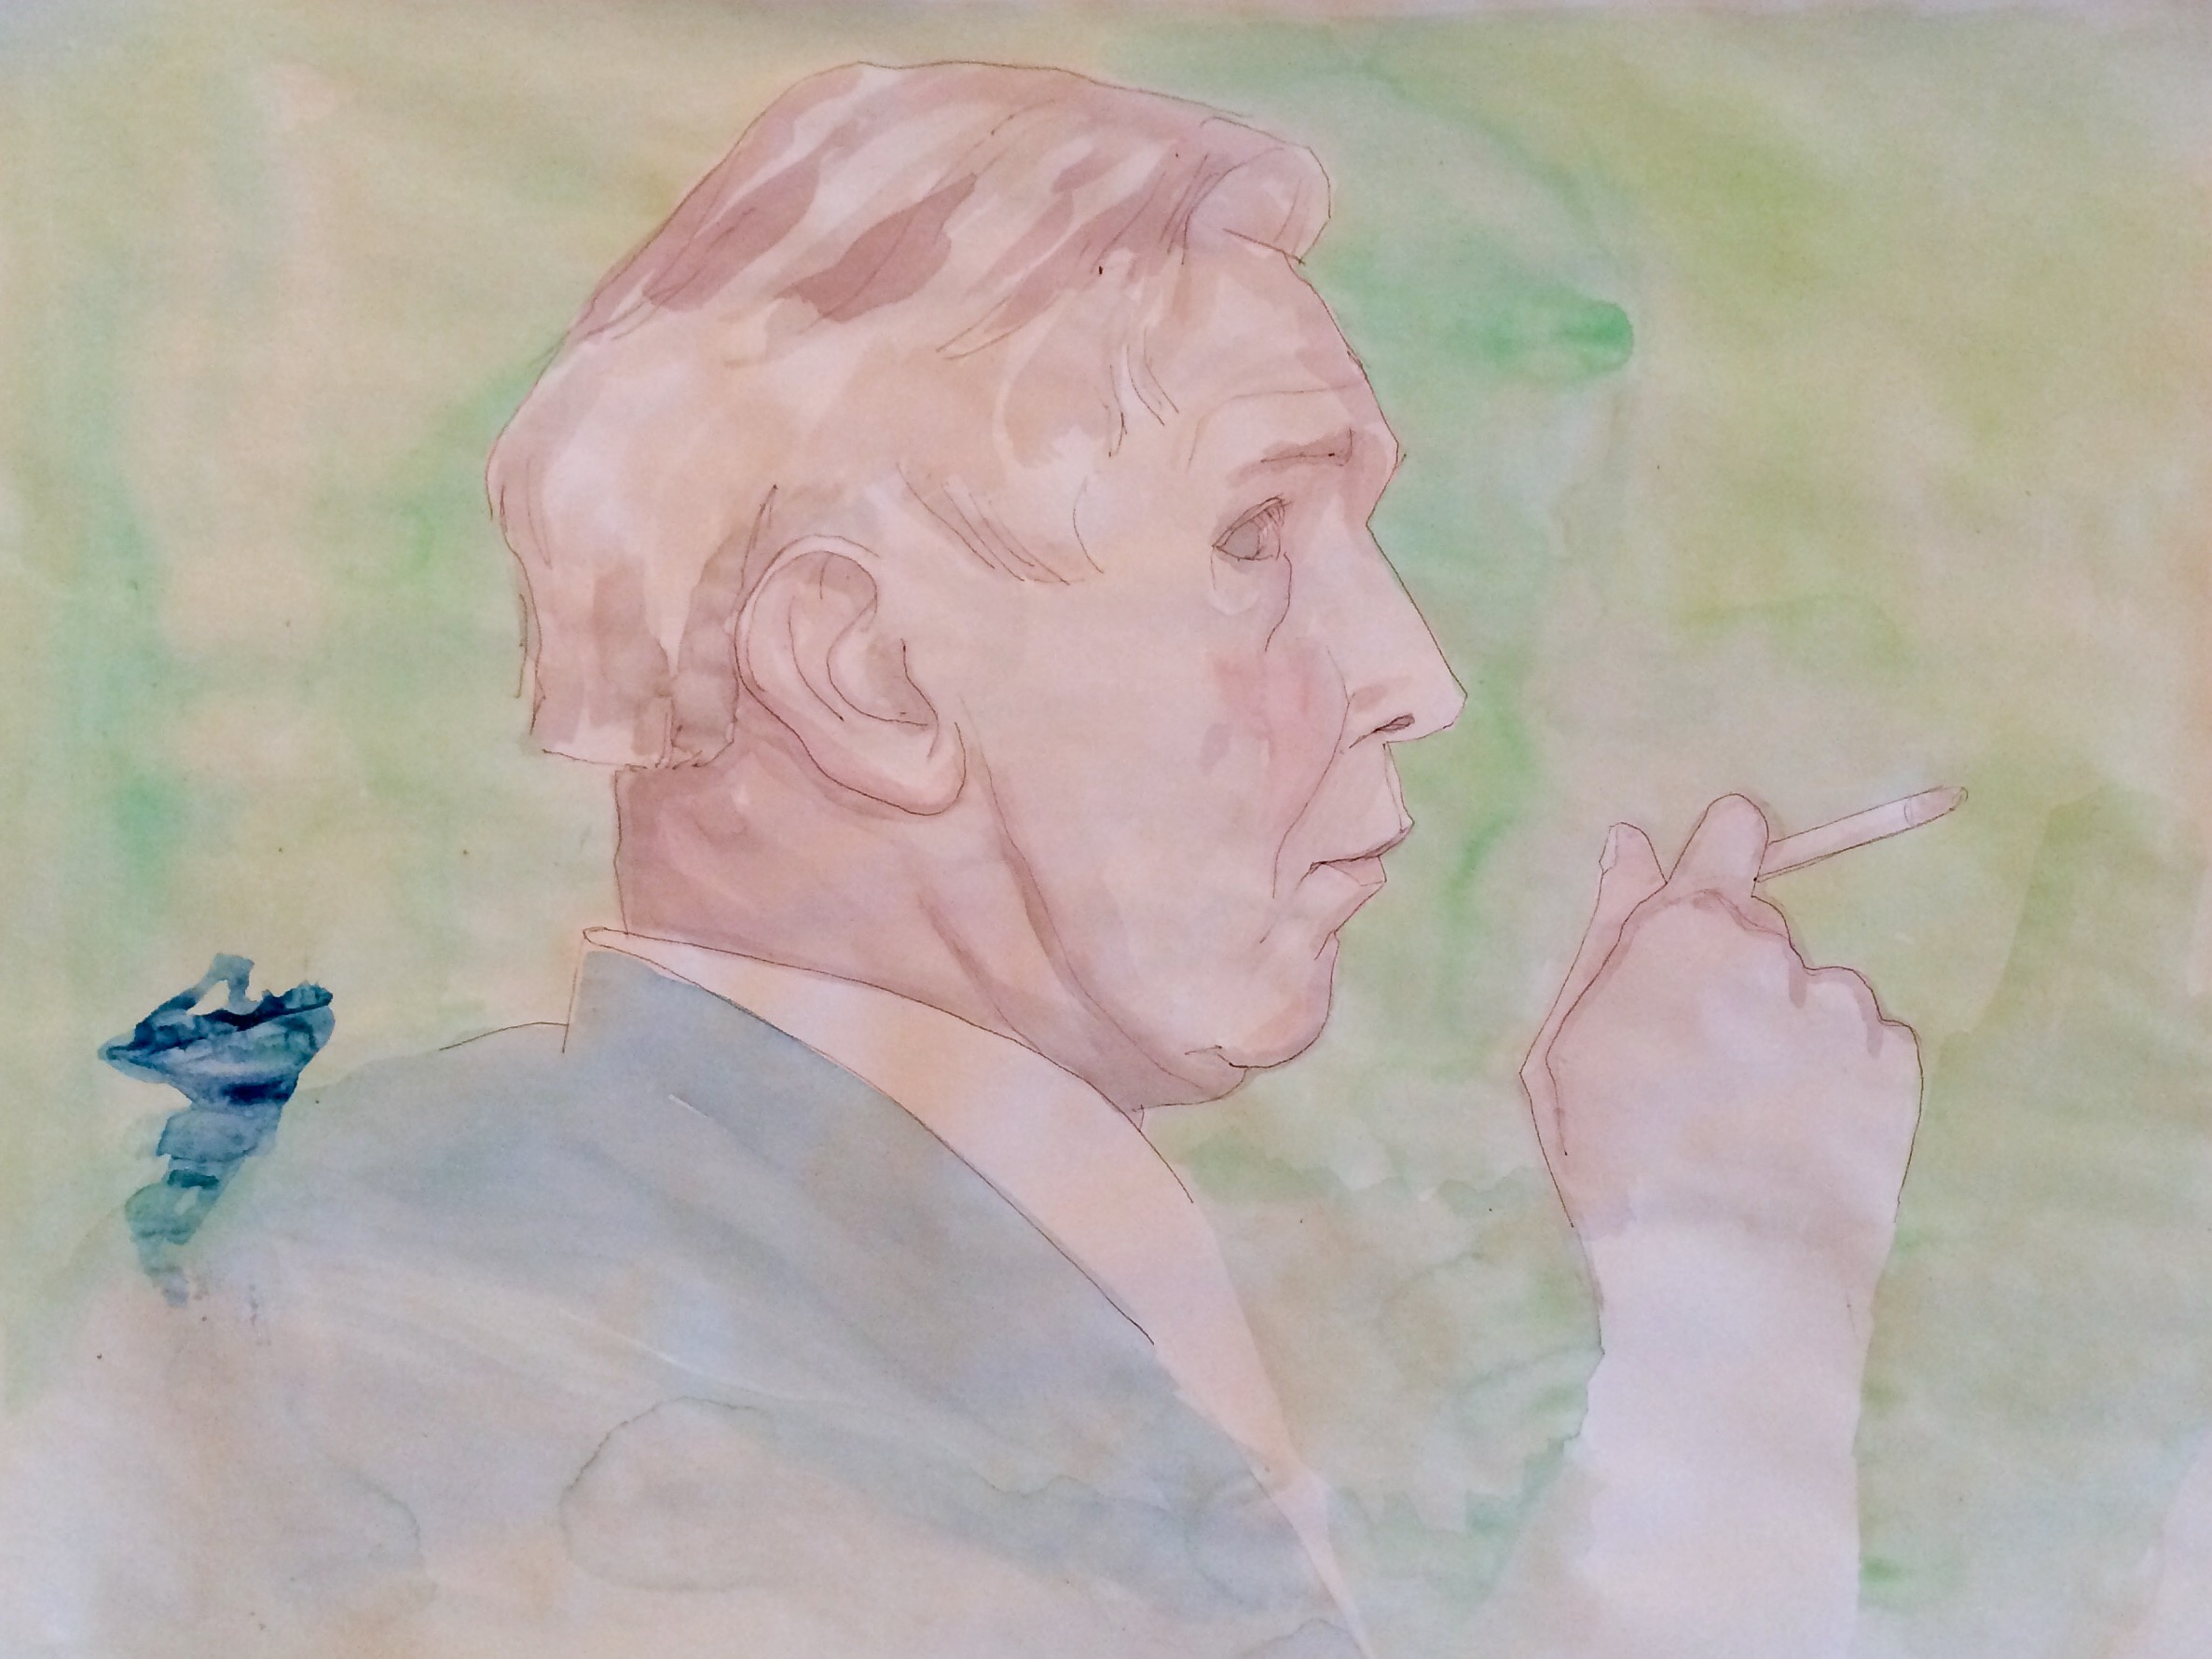   John Cheever   gouache on paper  18 x 24 inches, 2015 